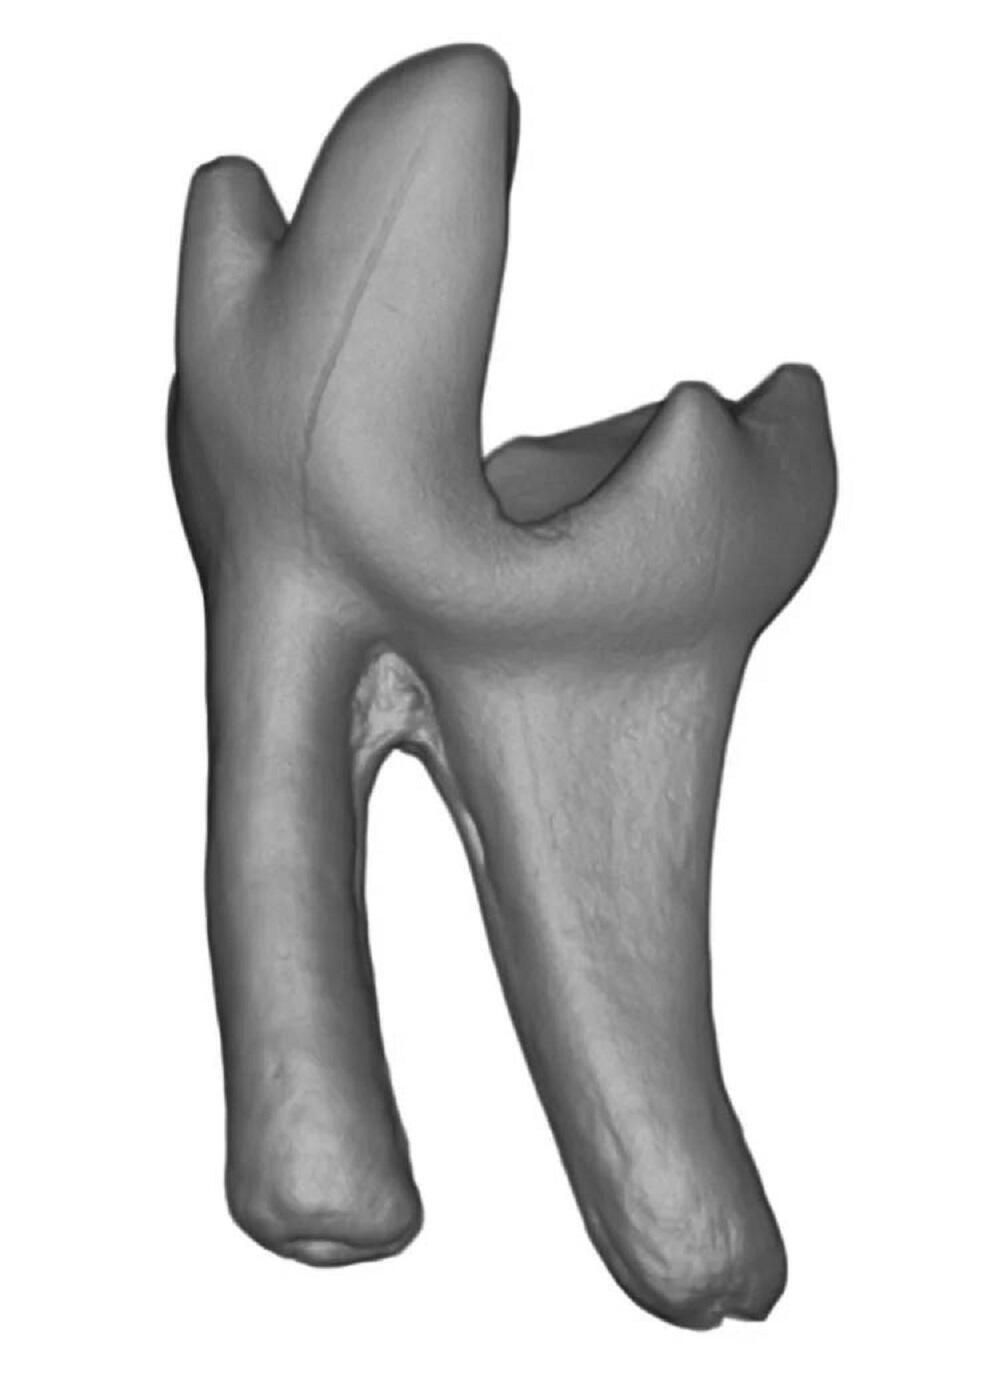 3D model of a Sikuomys mikros tooth